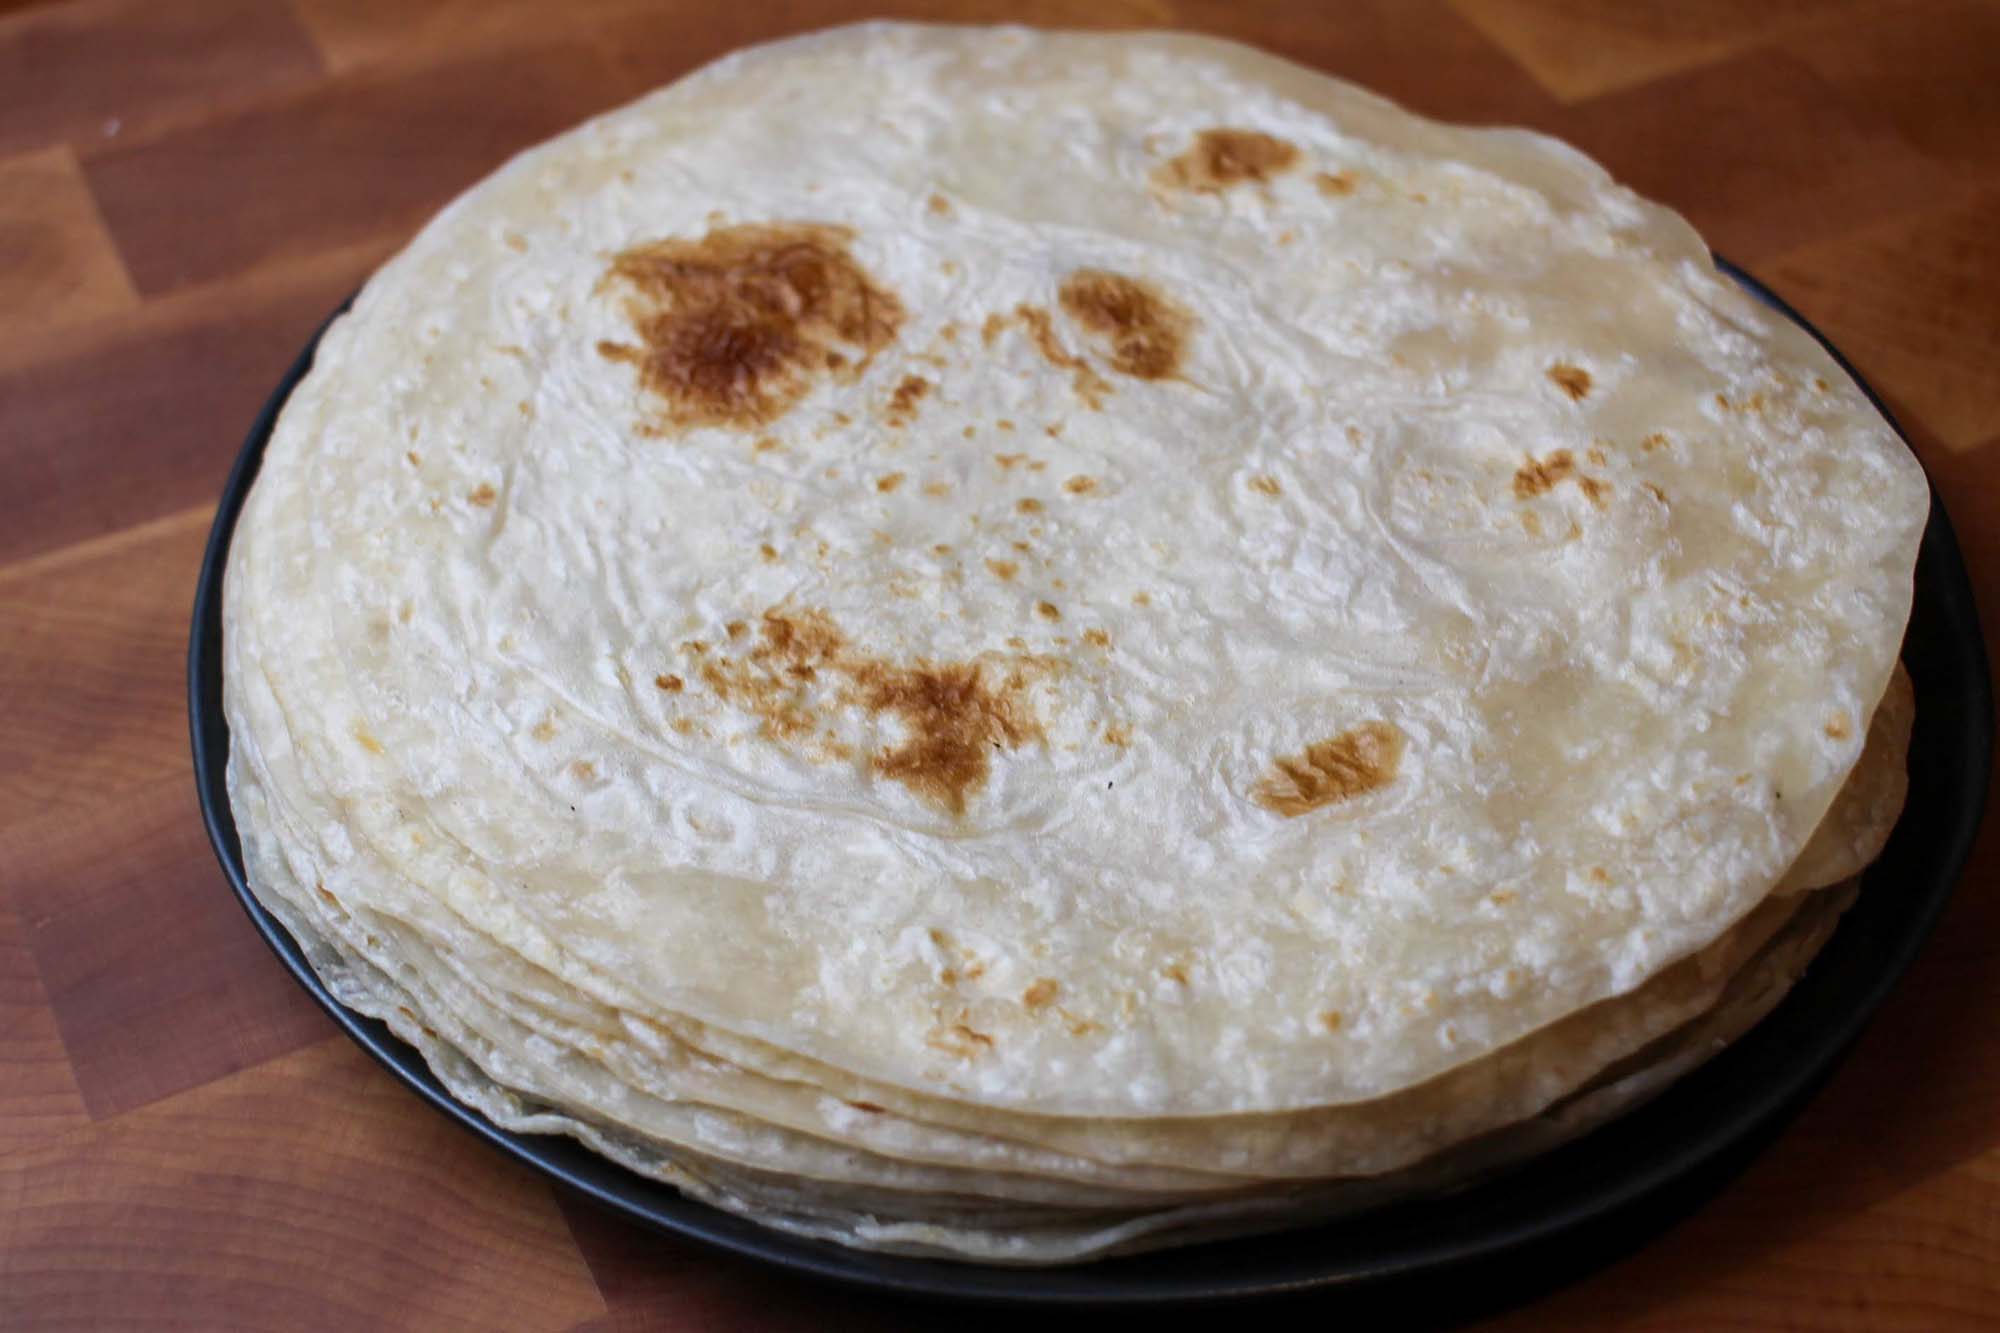 A stack of flour tortillas, blistered in spots.